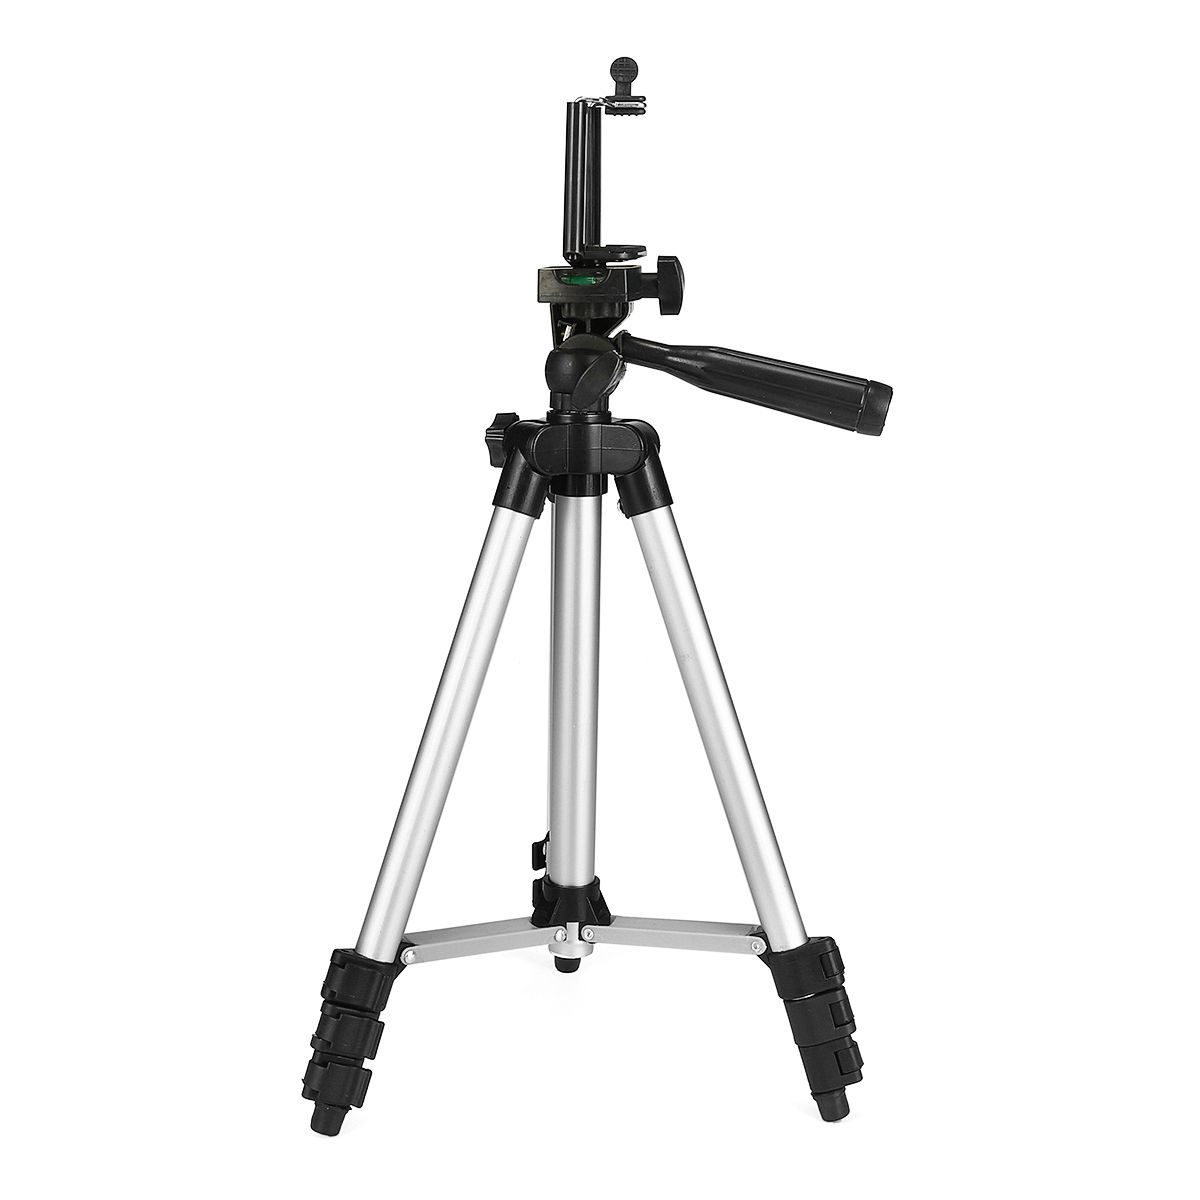 Adjustable-Holder-Telescopic-Tripod-Stand-Kits-with-bluetooth-Control-for-Camera-Mobile-Phone-1289378